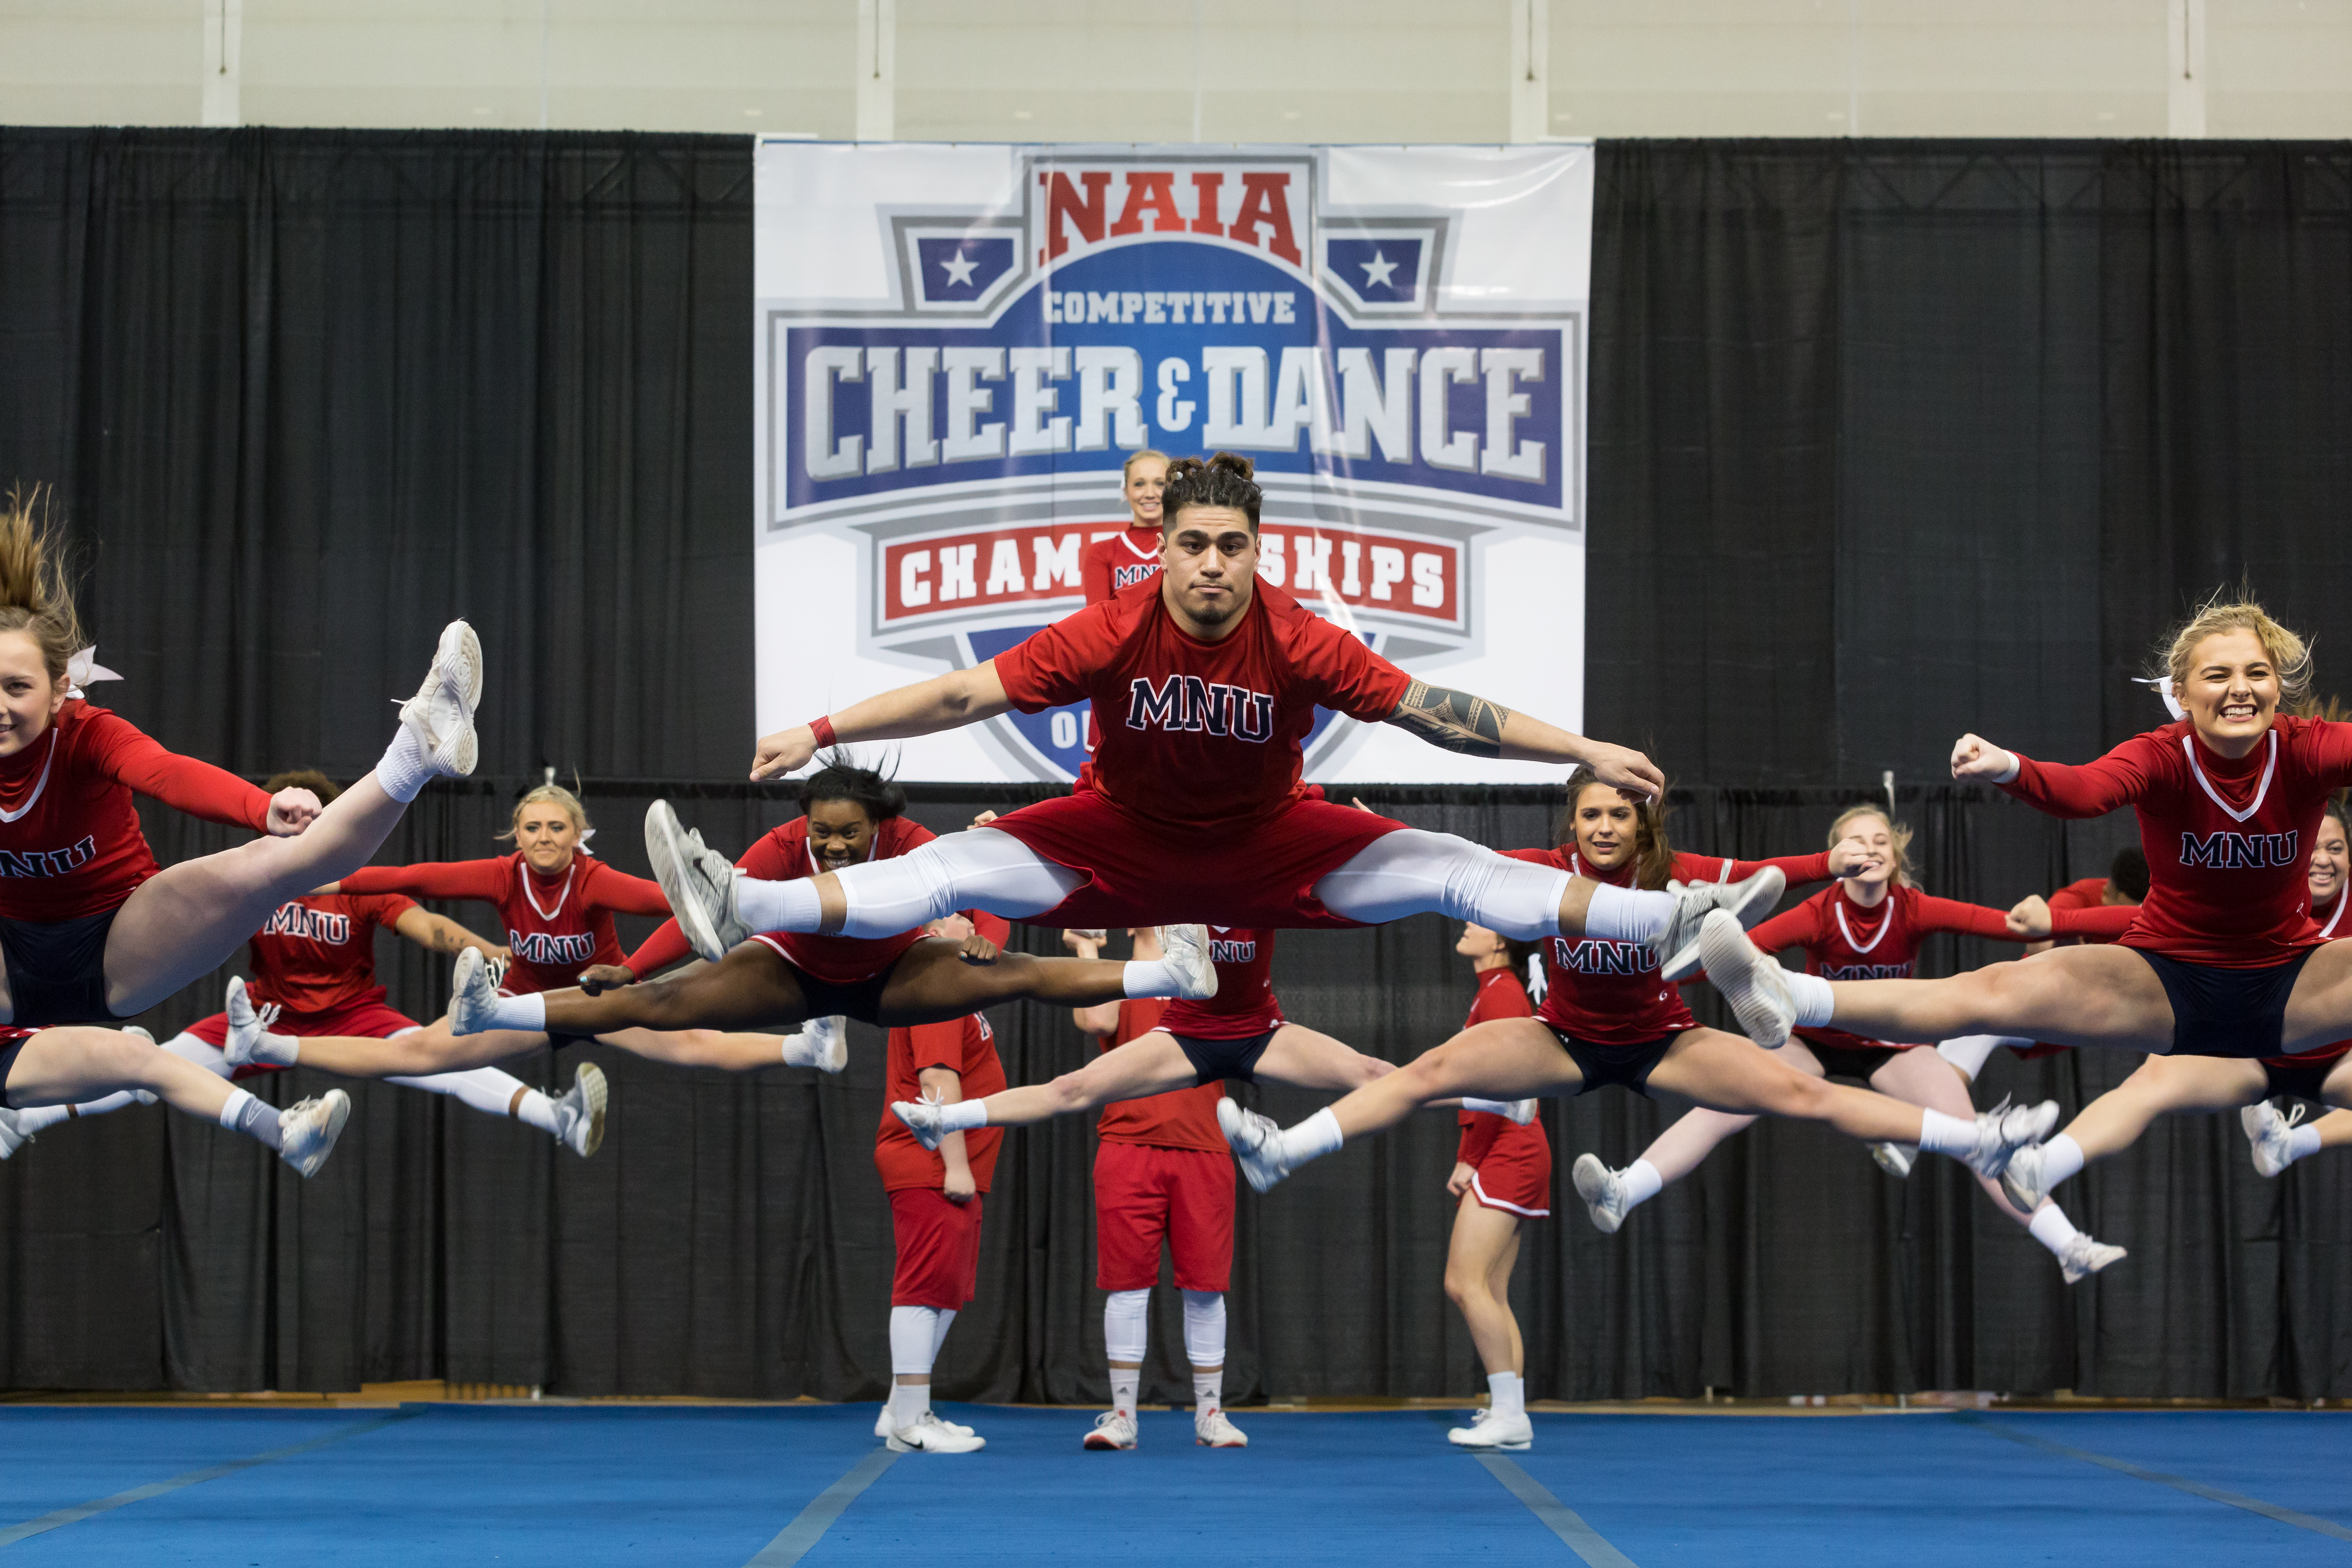 2018 NAIA Competitive Cheer and Dance Qualifying Group Tournaments Announced